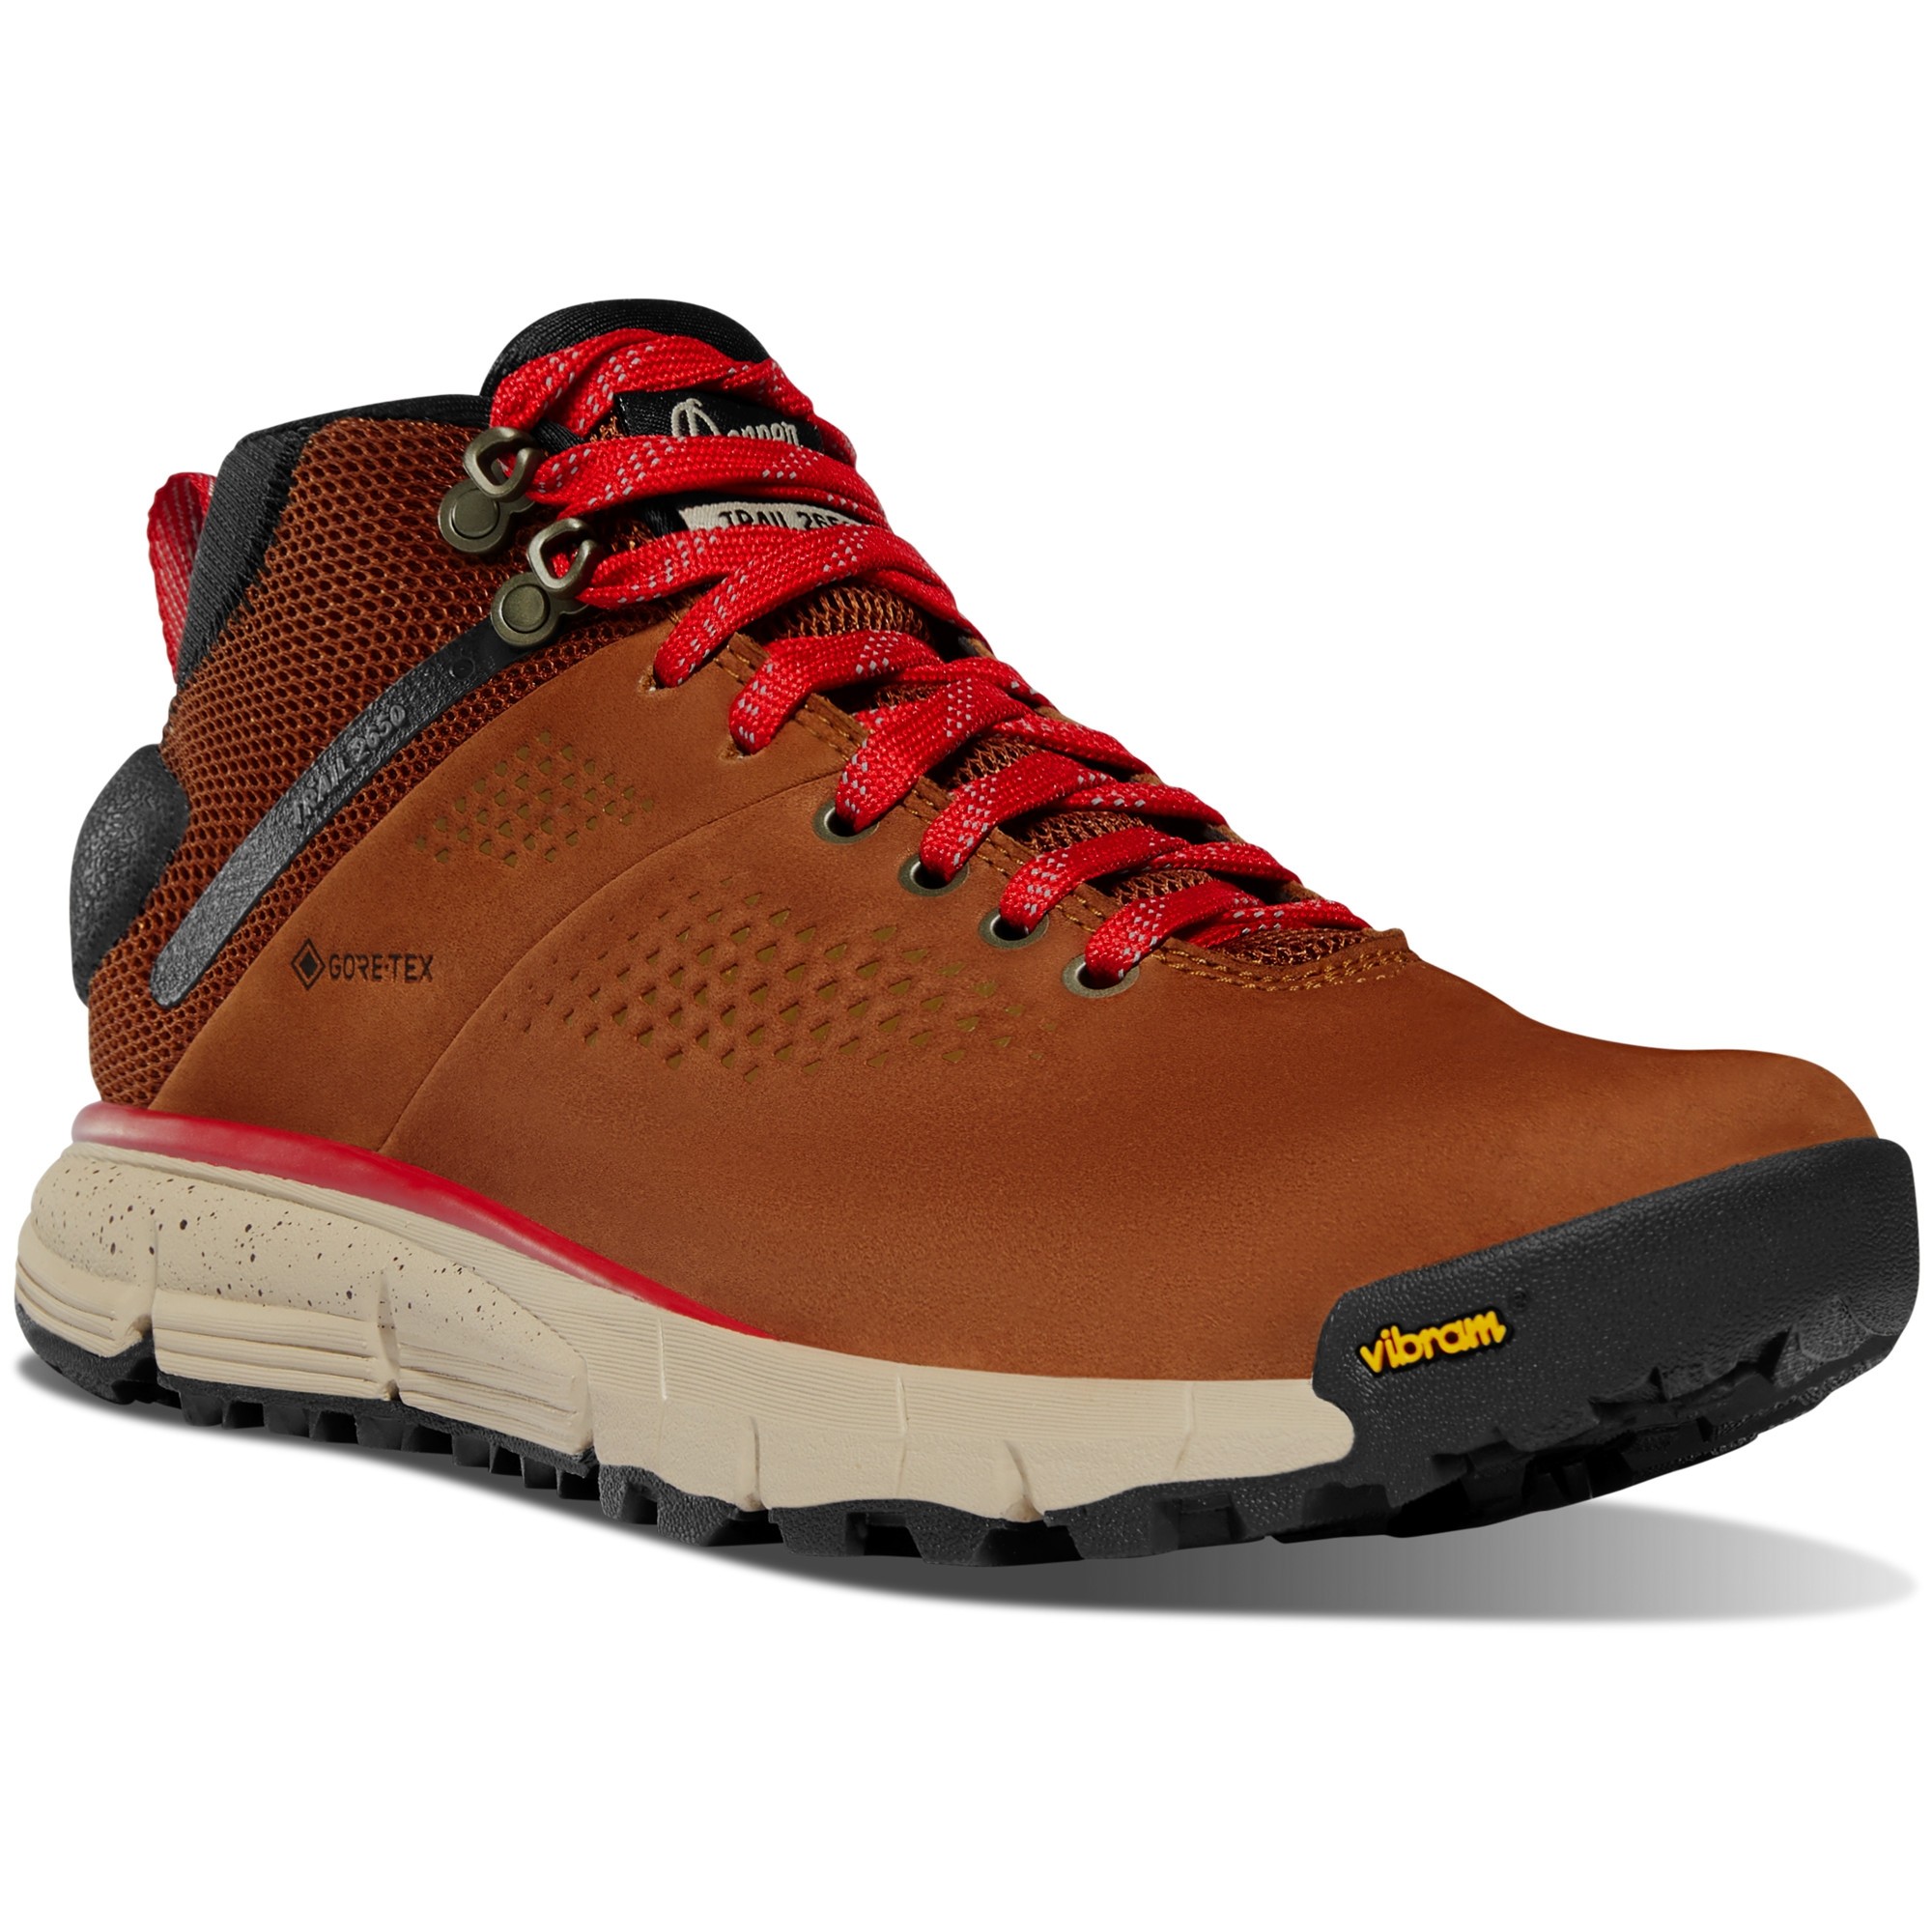 Danner Womens Trail 2650 Mid GTX : Brown Red